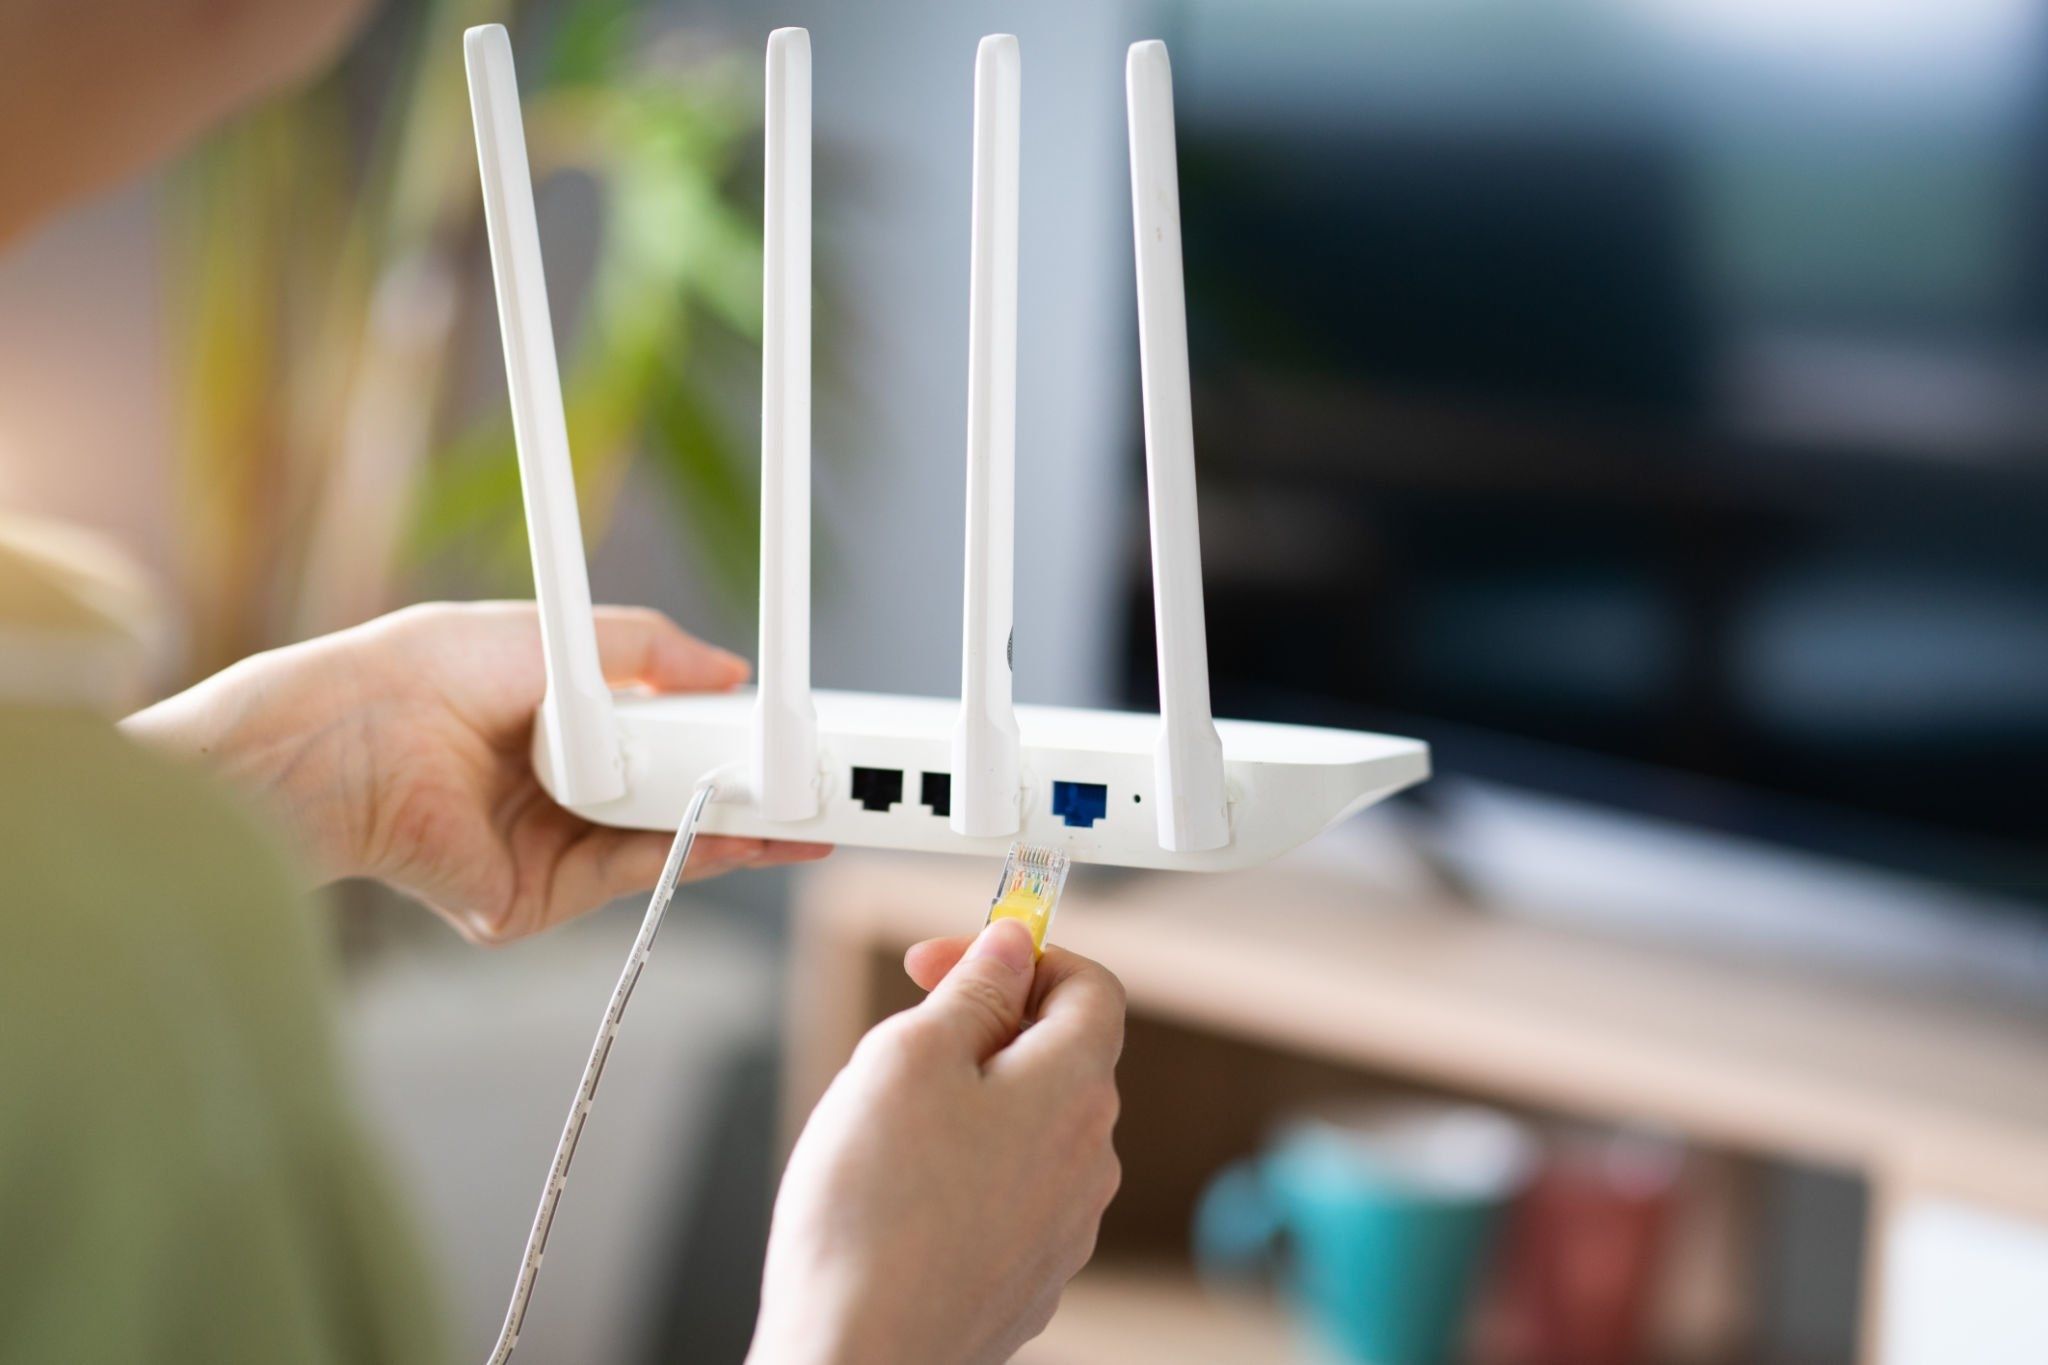 Unplug your modem first, then your router.